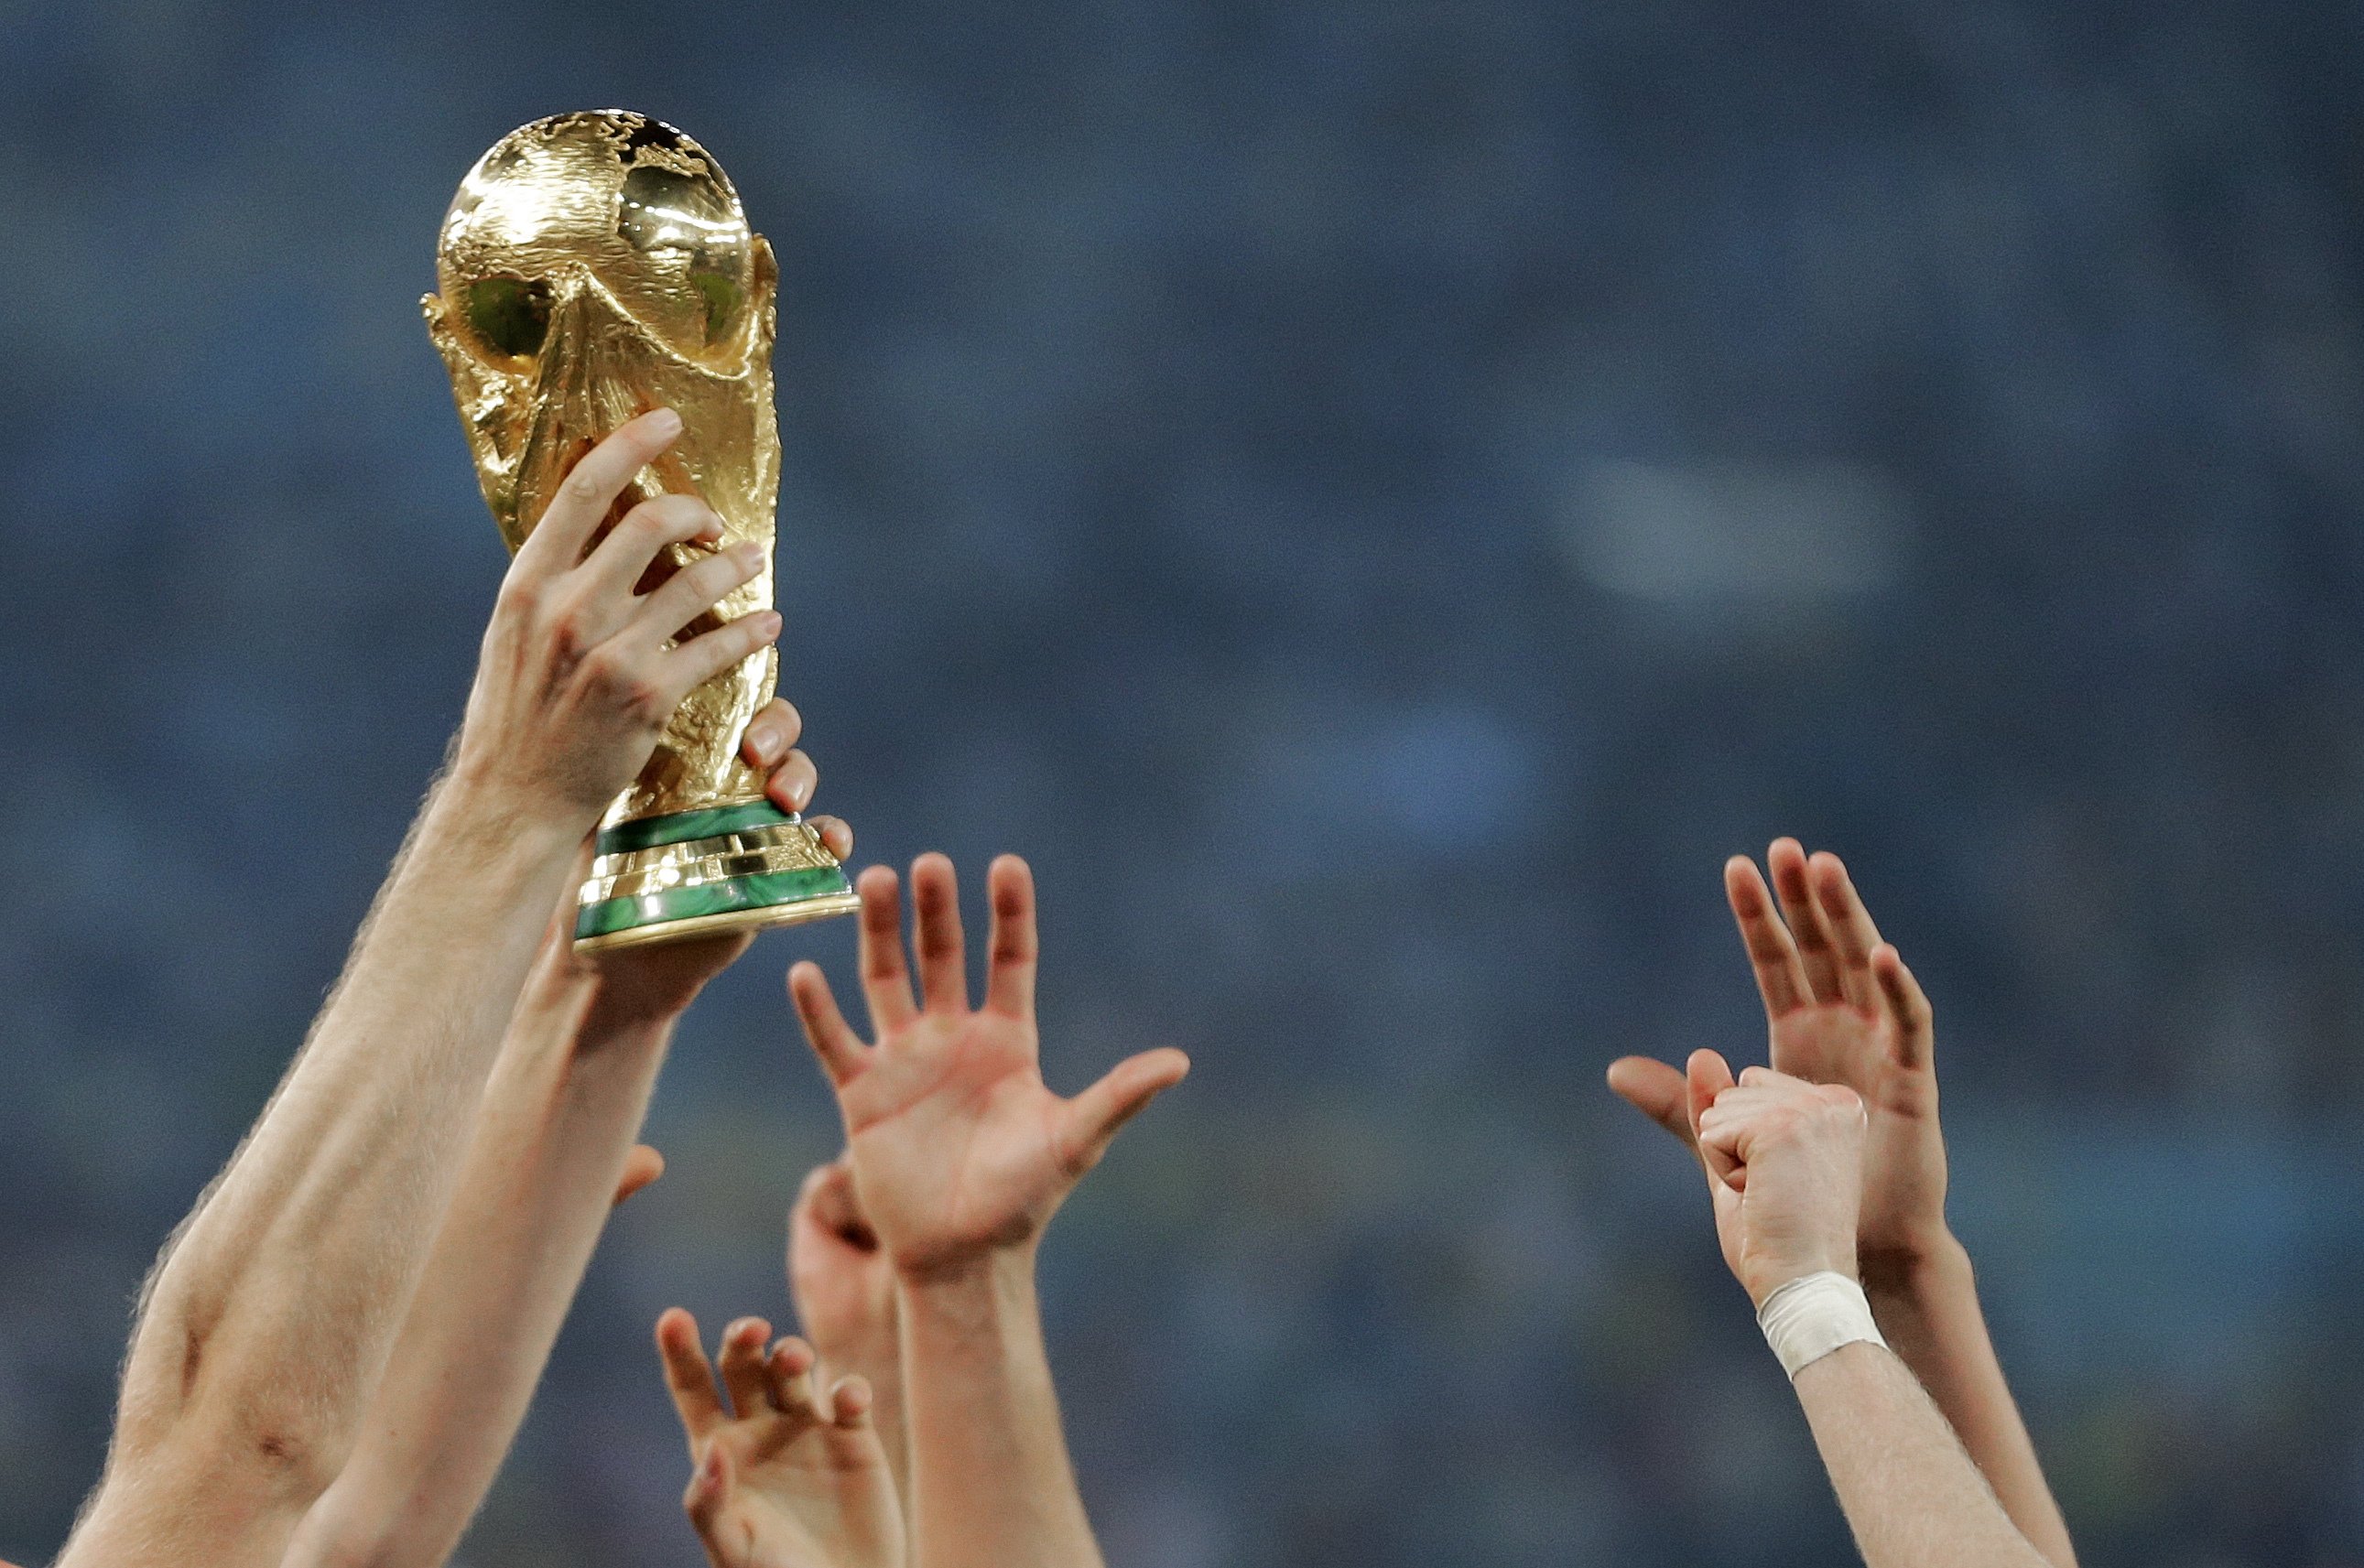 World s cup. Ворлд кап 2026. FIFA World Cup 2026. FIFA World Cup Final 2026. Morocco 2026 FIFA World Cup bid.